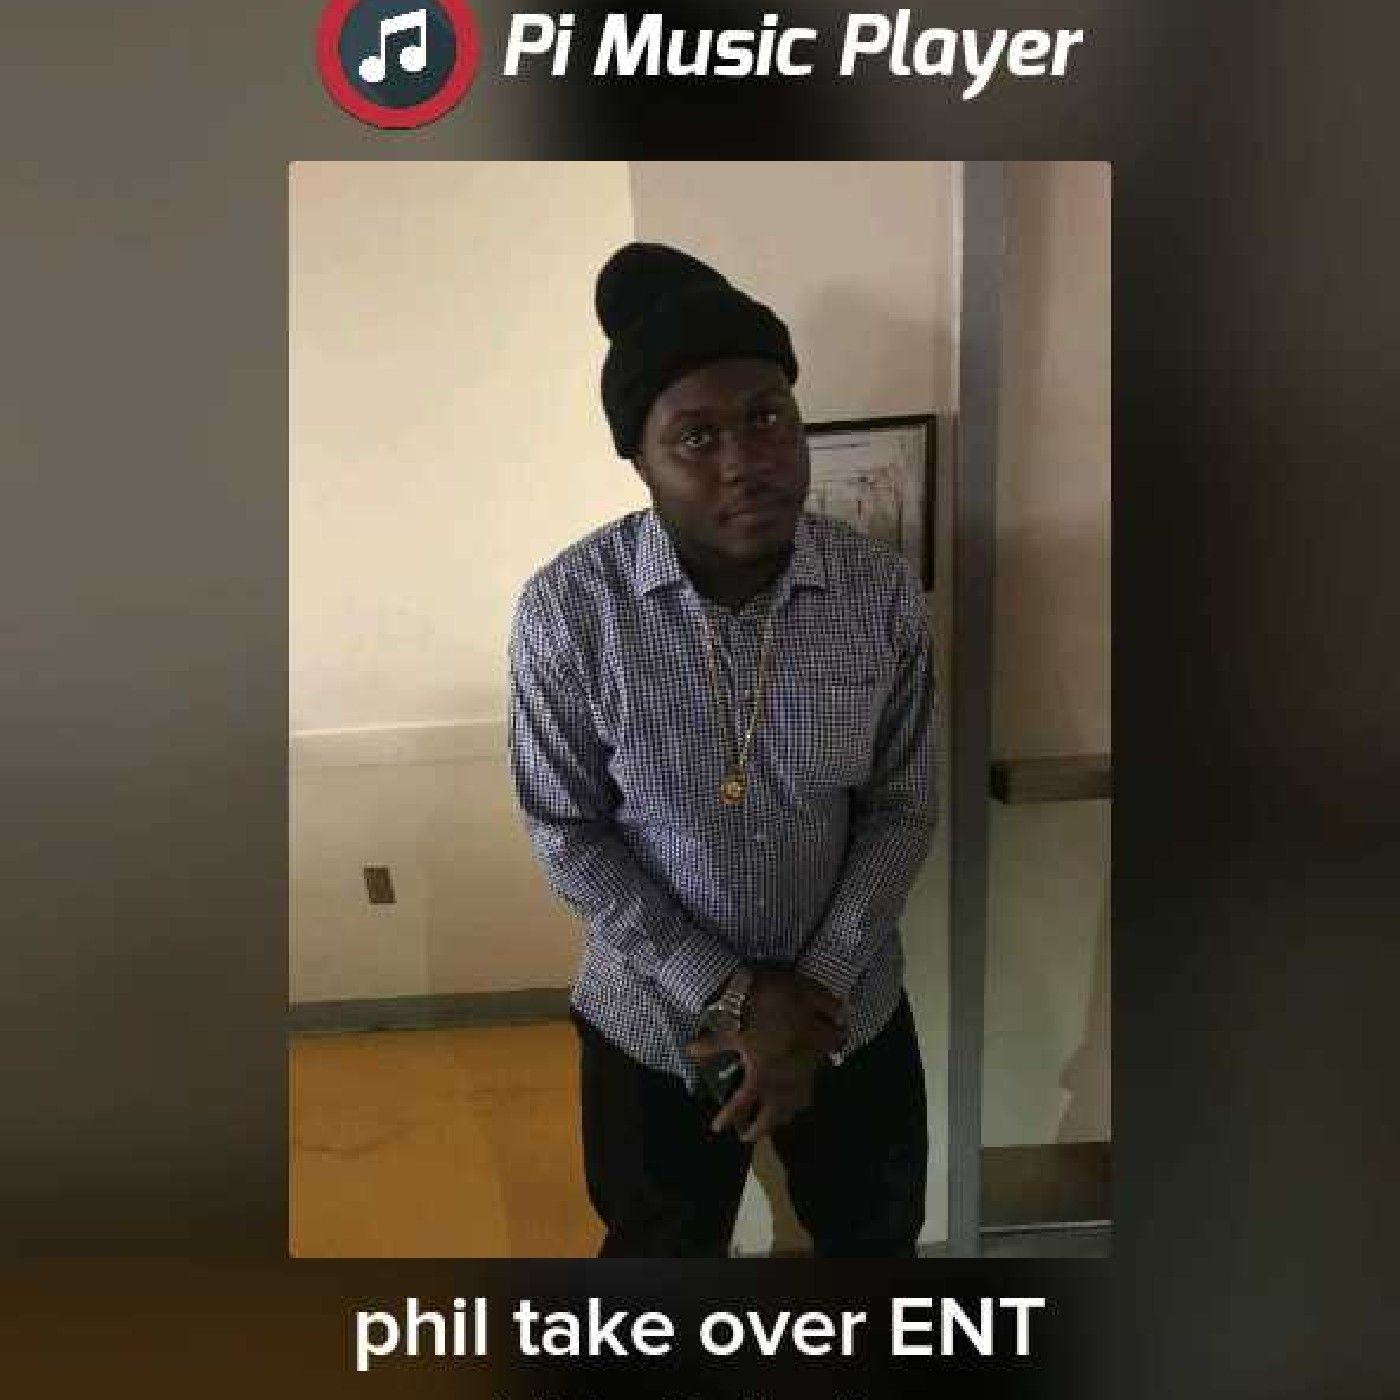 Episode 2 - Phil takeover ENT